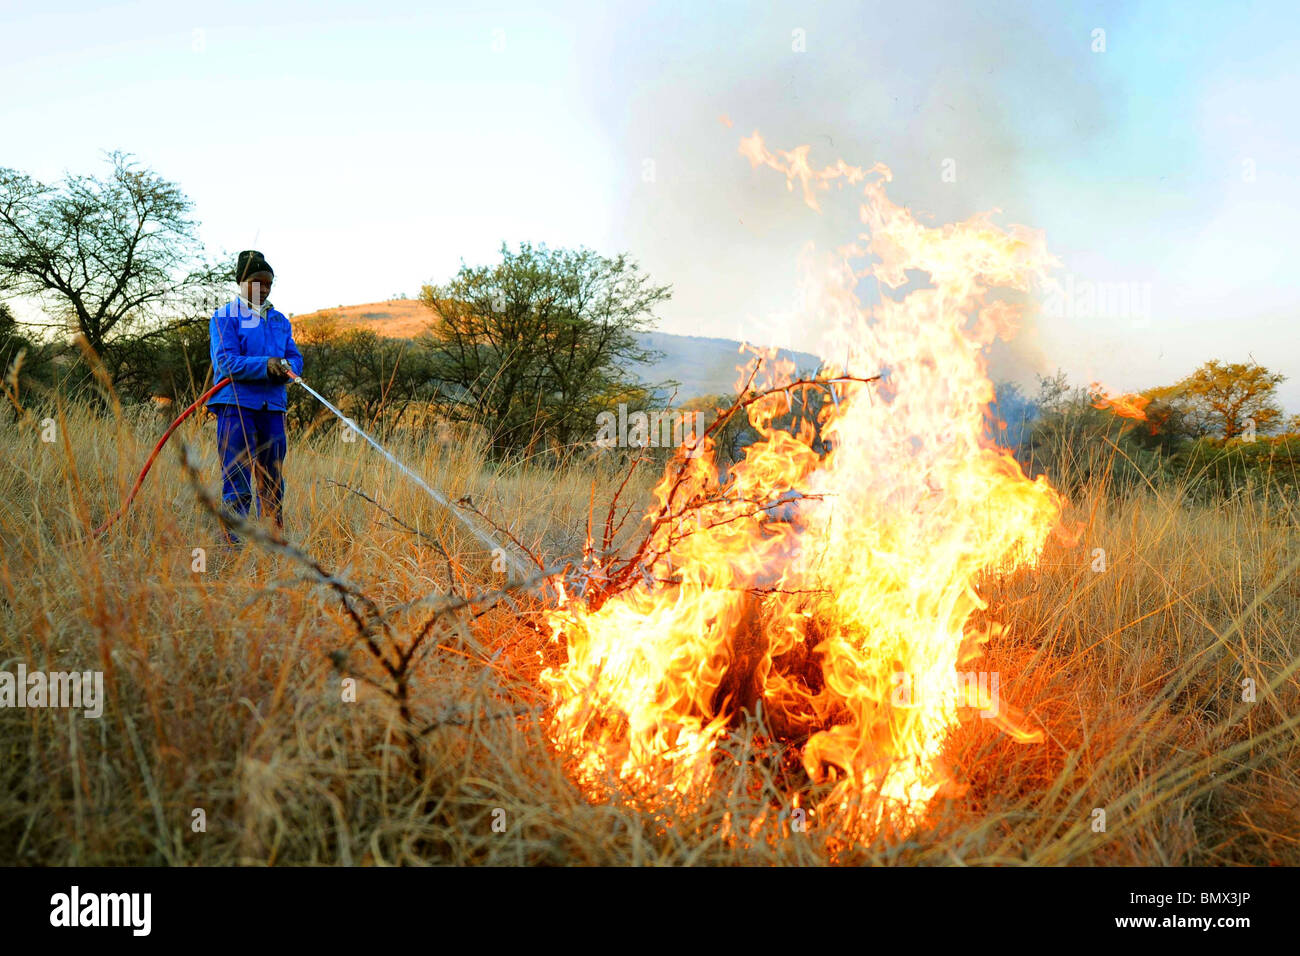 RANCH WORKERS CREAT FIREBREAKS 2010 FIFA WORLD CUP SOUTH AFRI KARMA RANCH  SOUTH AFRICA 21 June 2010 Stock Photo